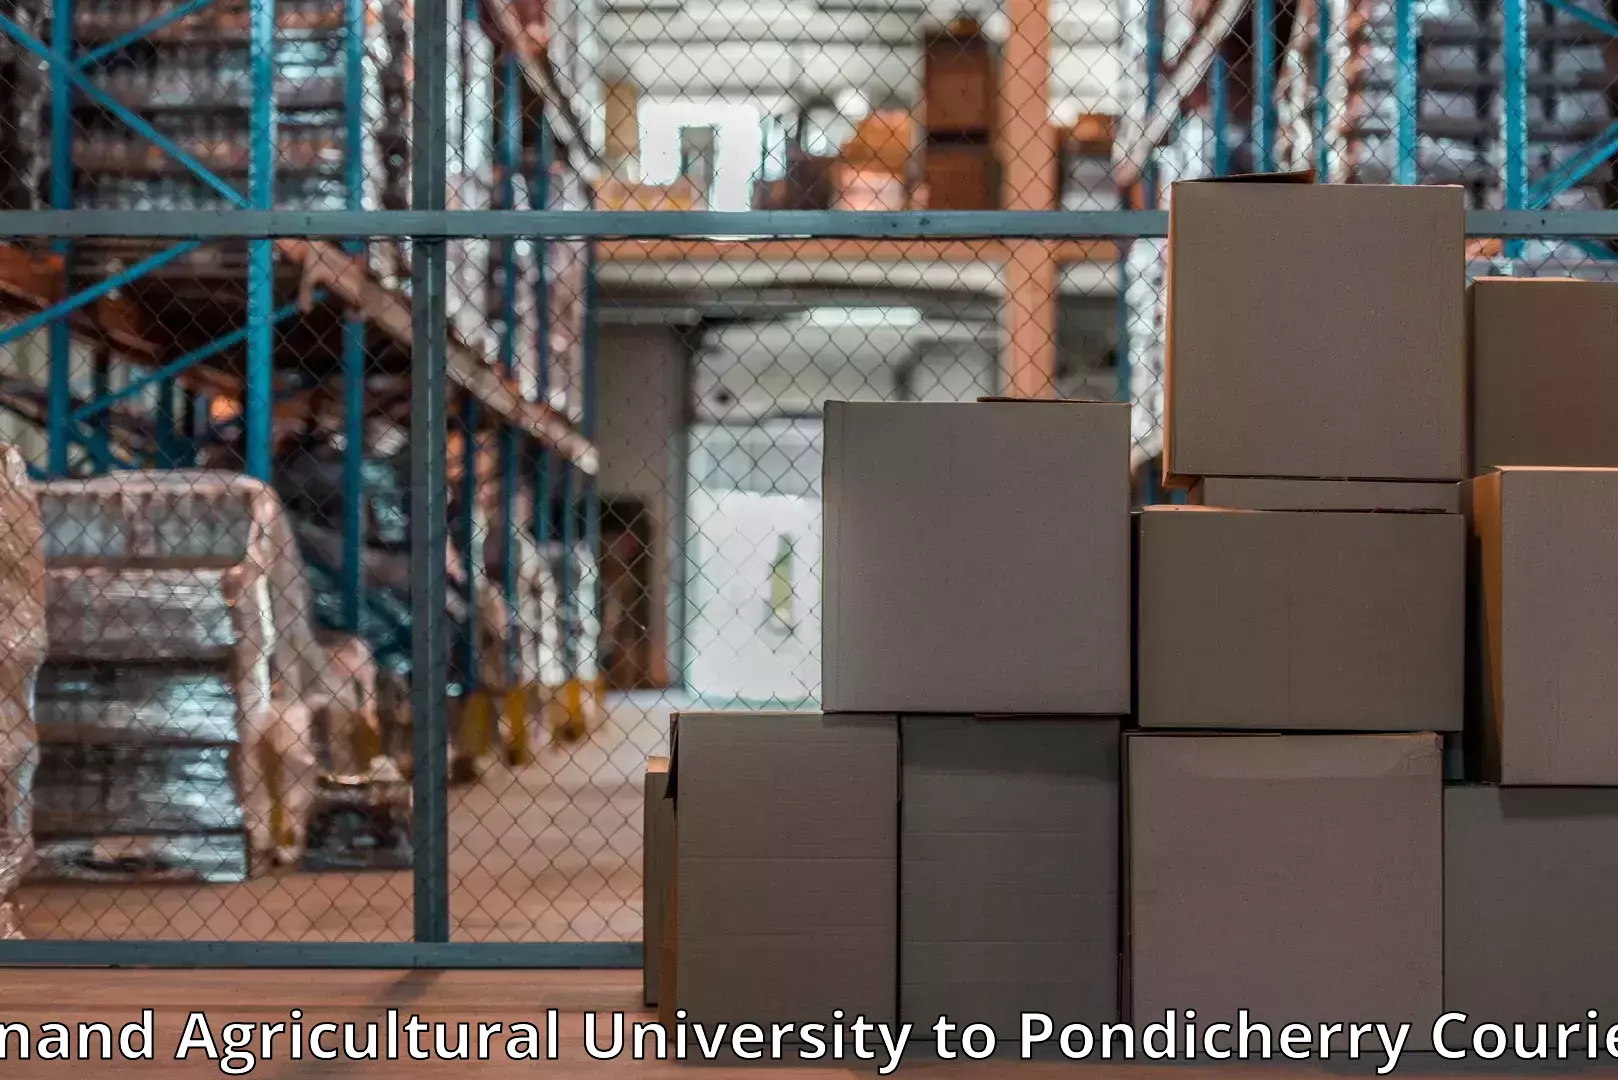 Furniture moving experts Anand Agricultural University to Pondicherry University